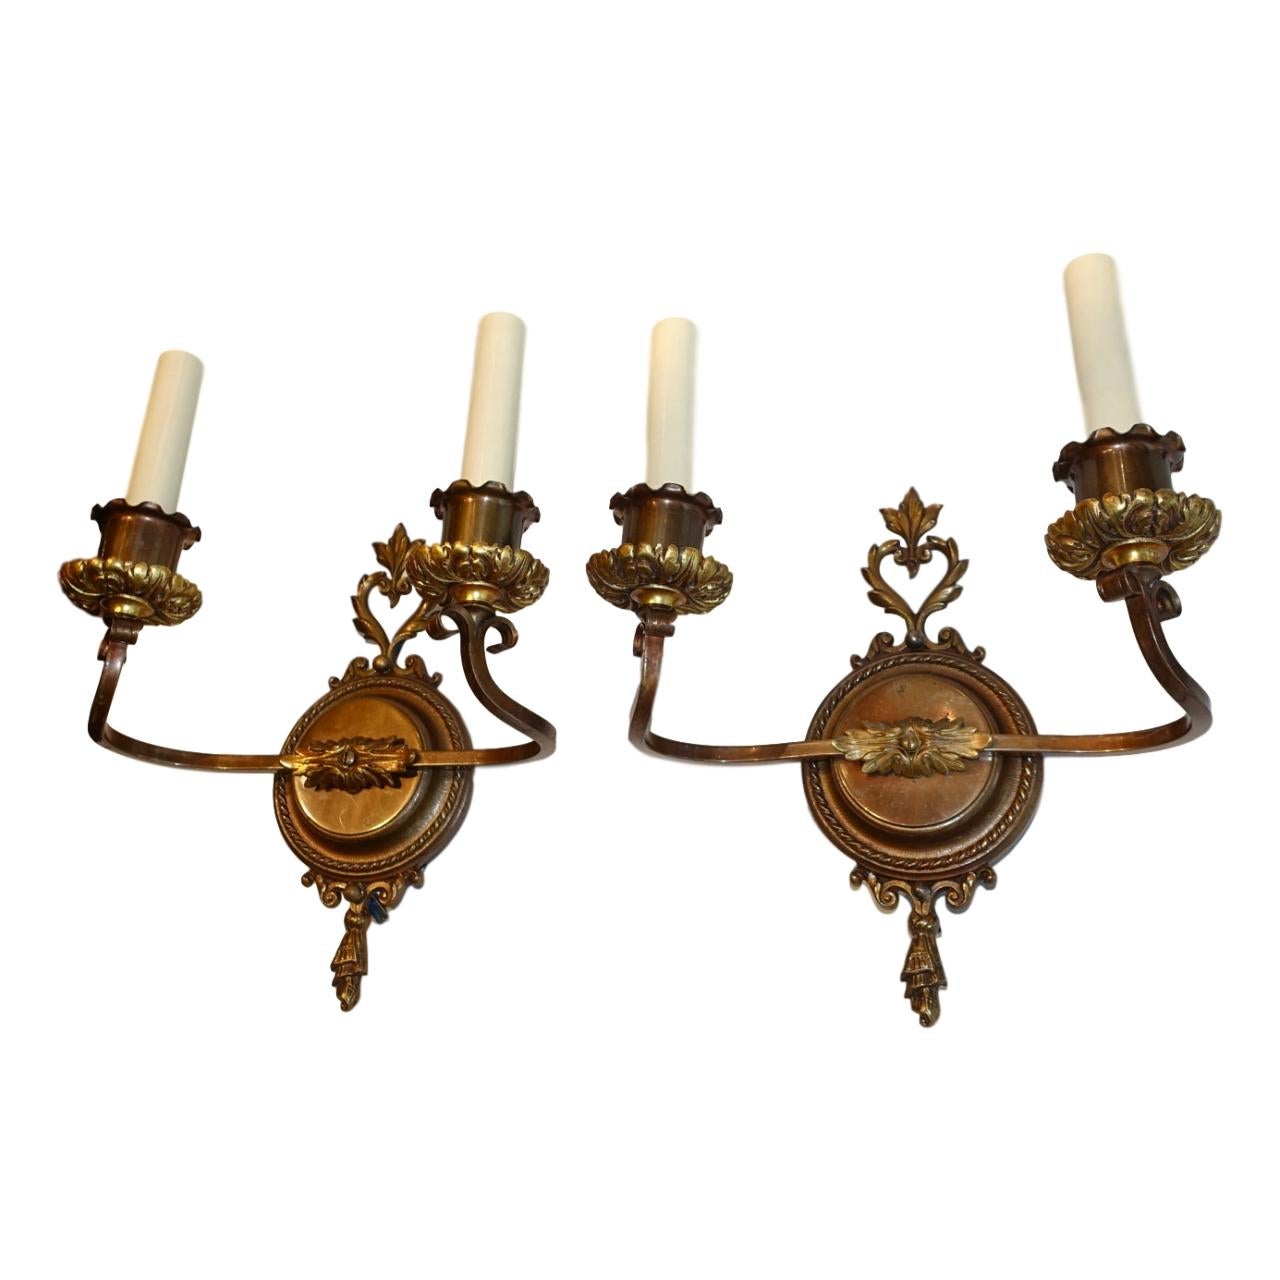 Set of four circa 1930's French neoclassic style patinated bronze sconces with a dark patina and foliage details. Sold in pairs.

Measurements:
Height: 12